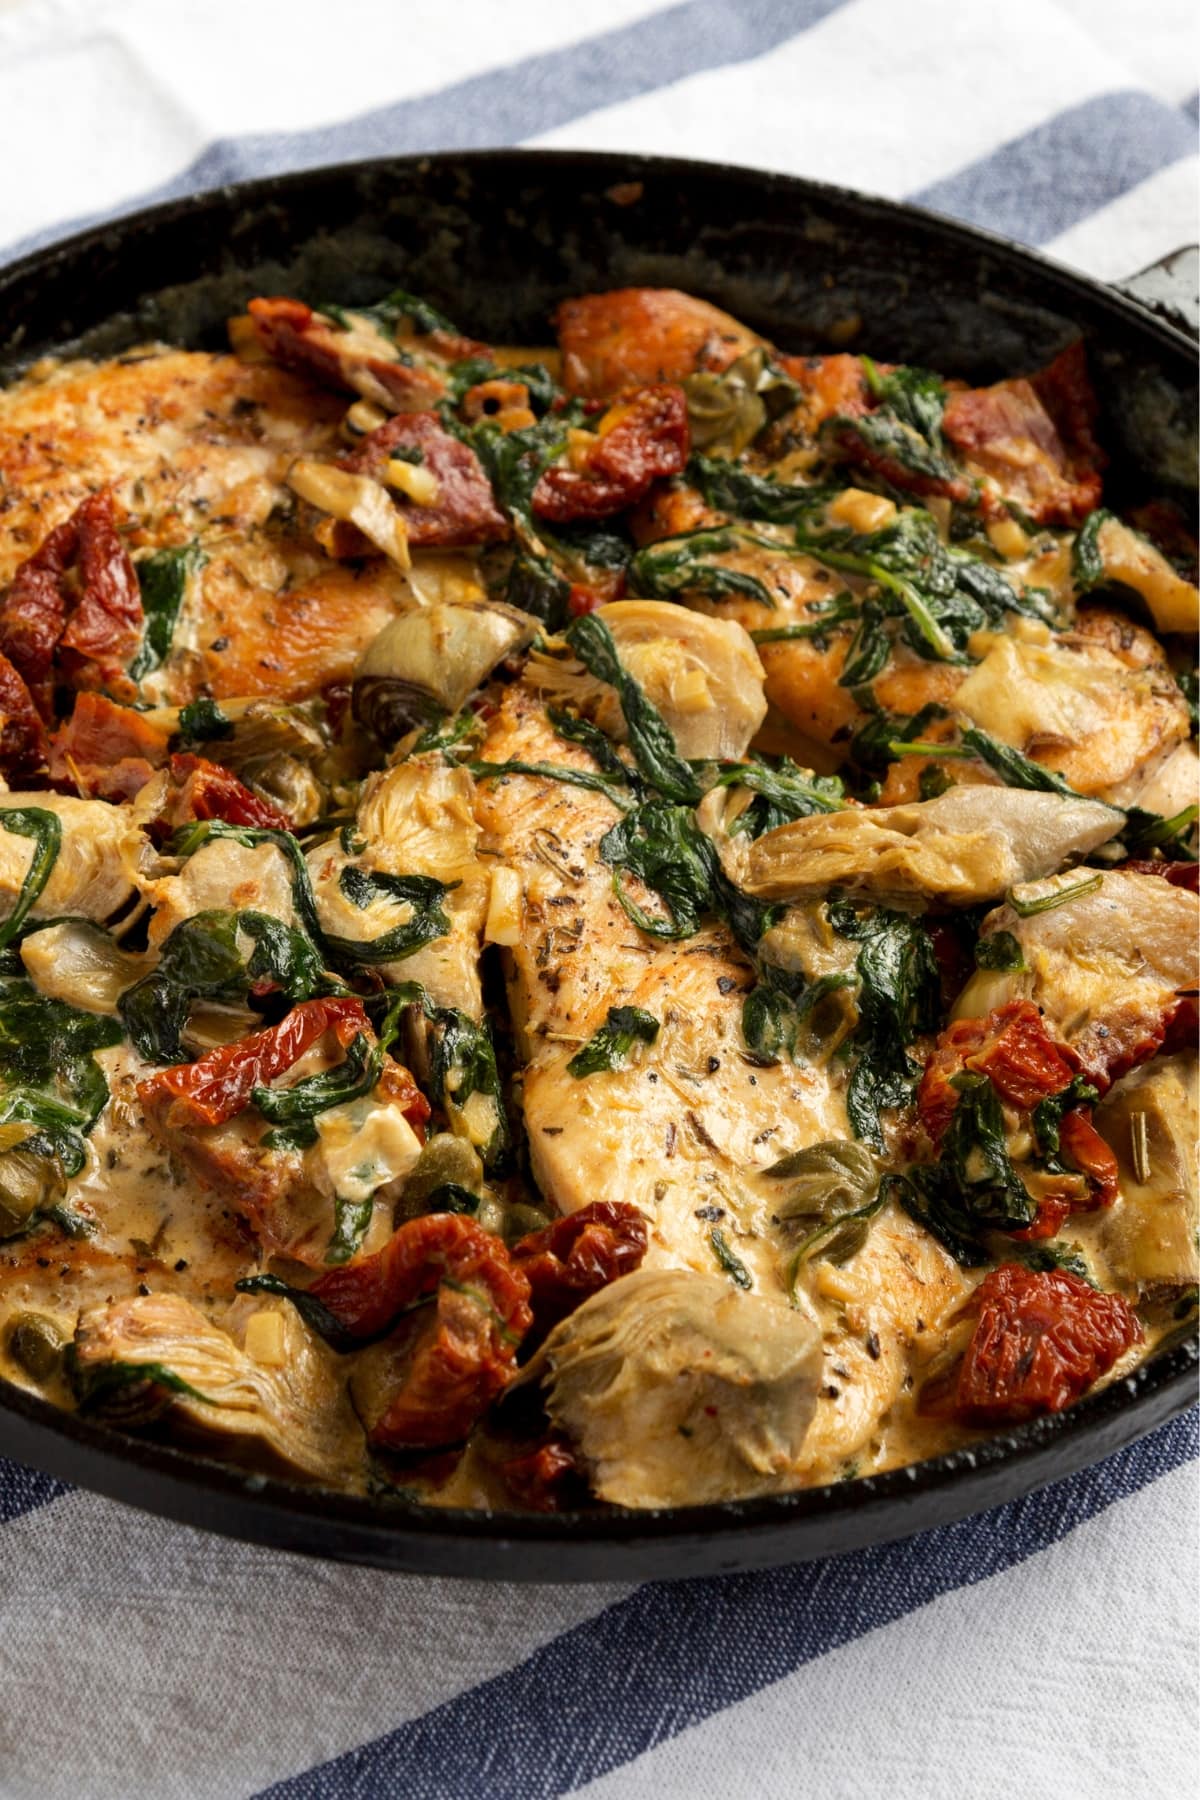 What to Serve with Tuscan Chicken (25 Best Side Dishes): Homemade Creamy Tuscan Chicken with Sun-Dried Tomatoes and Spinach